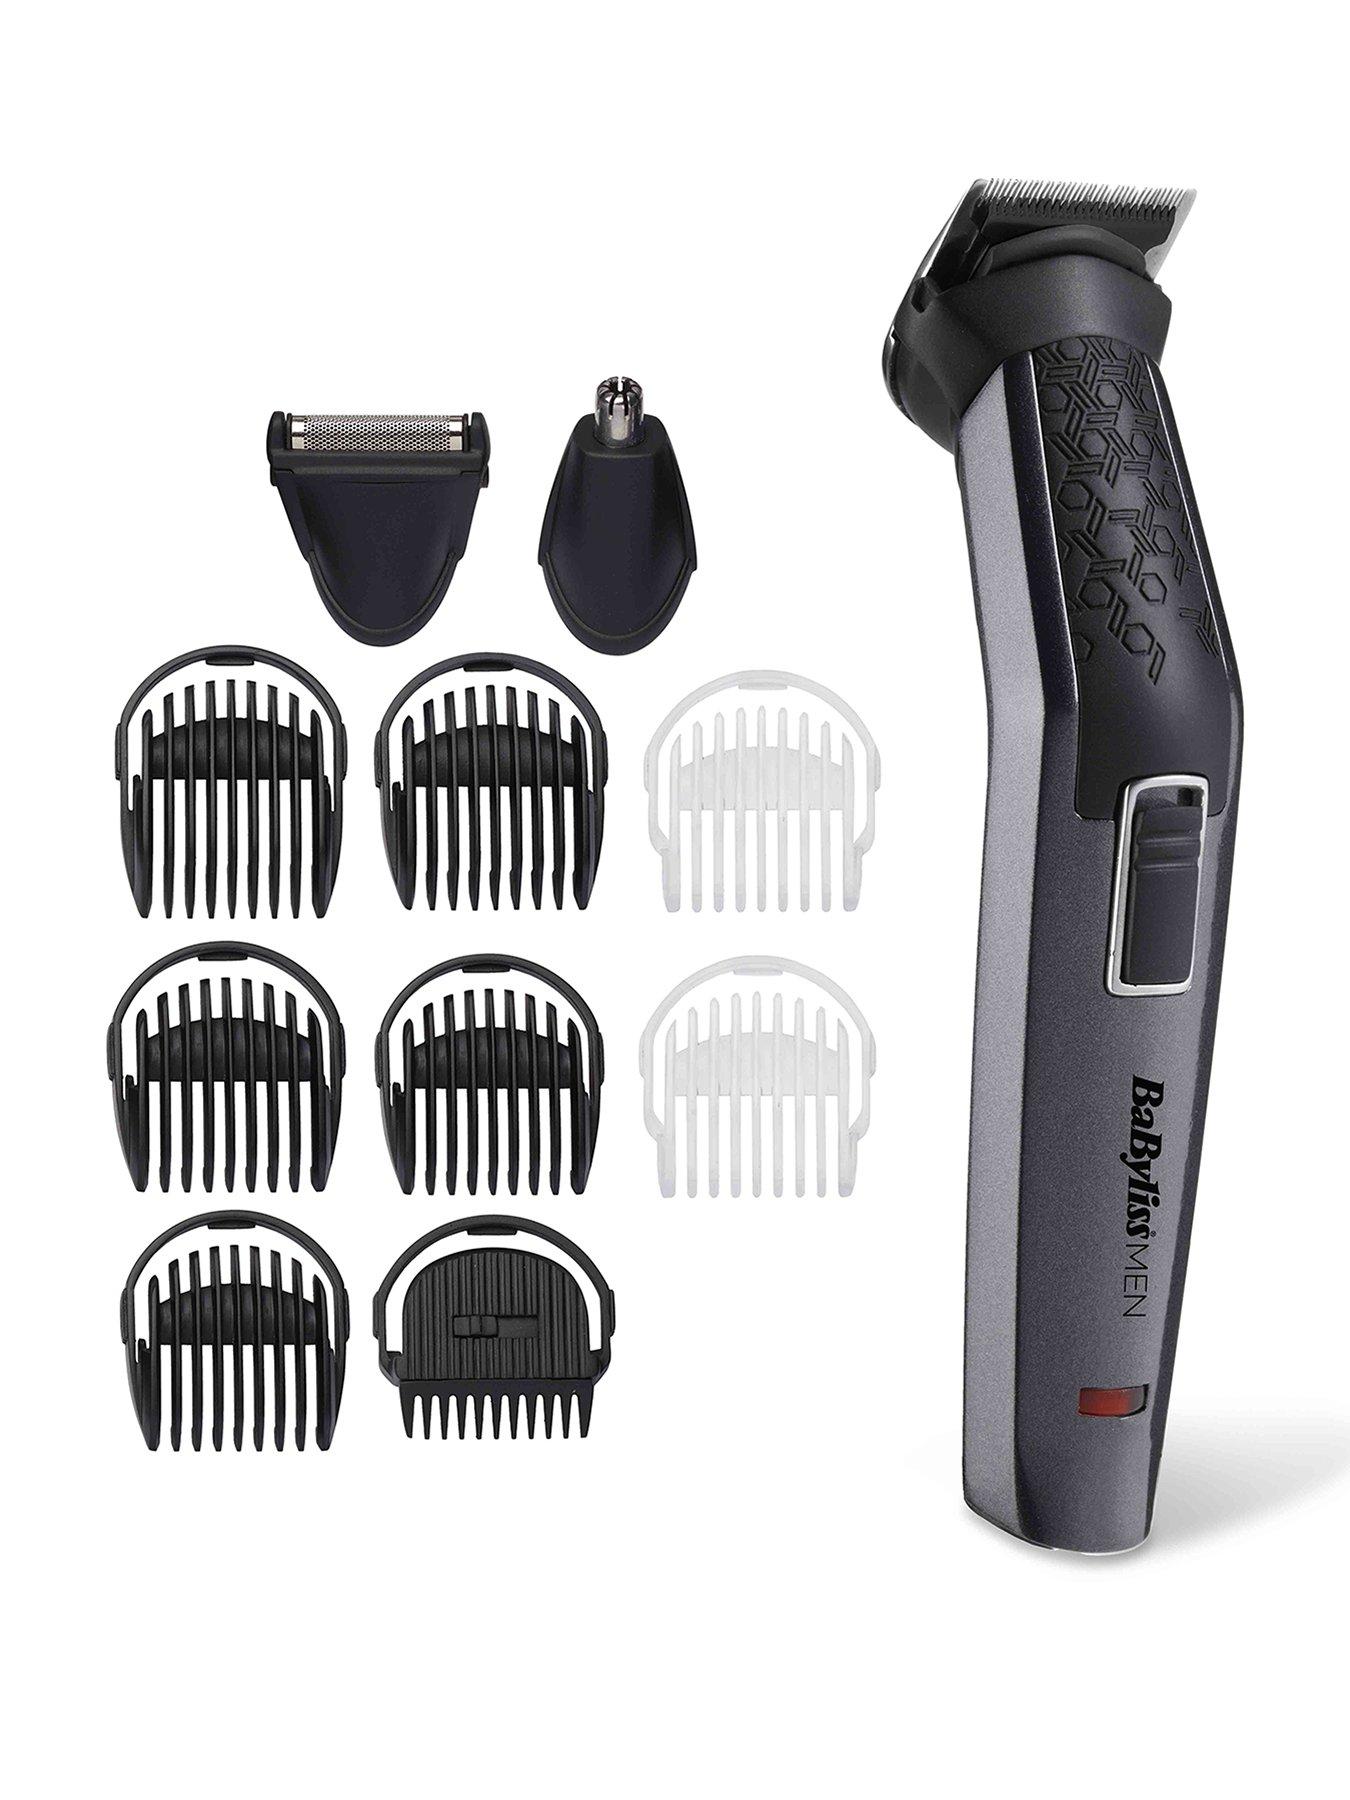 hair clipper sizes in mm